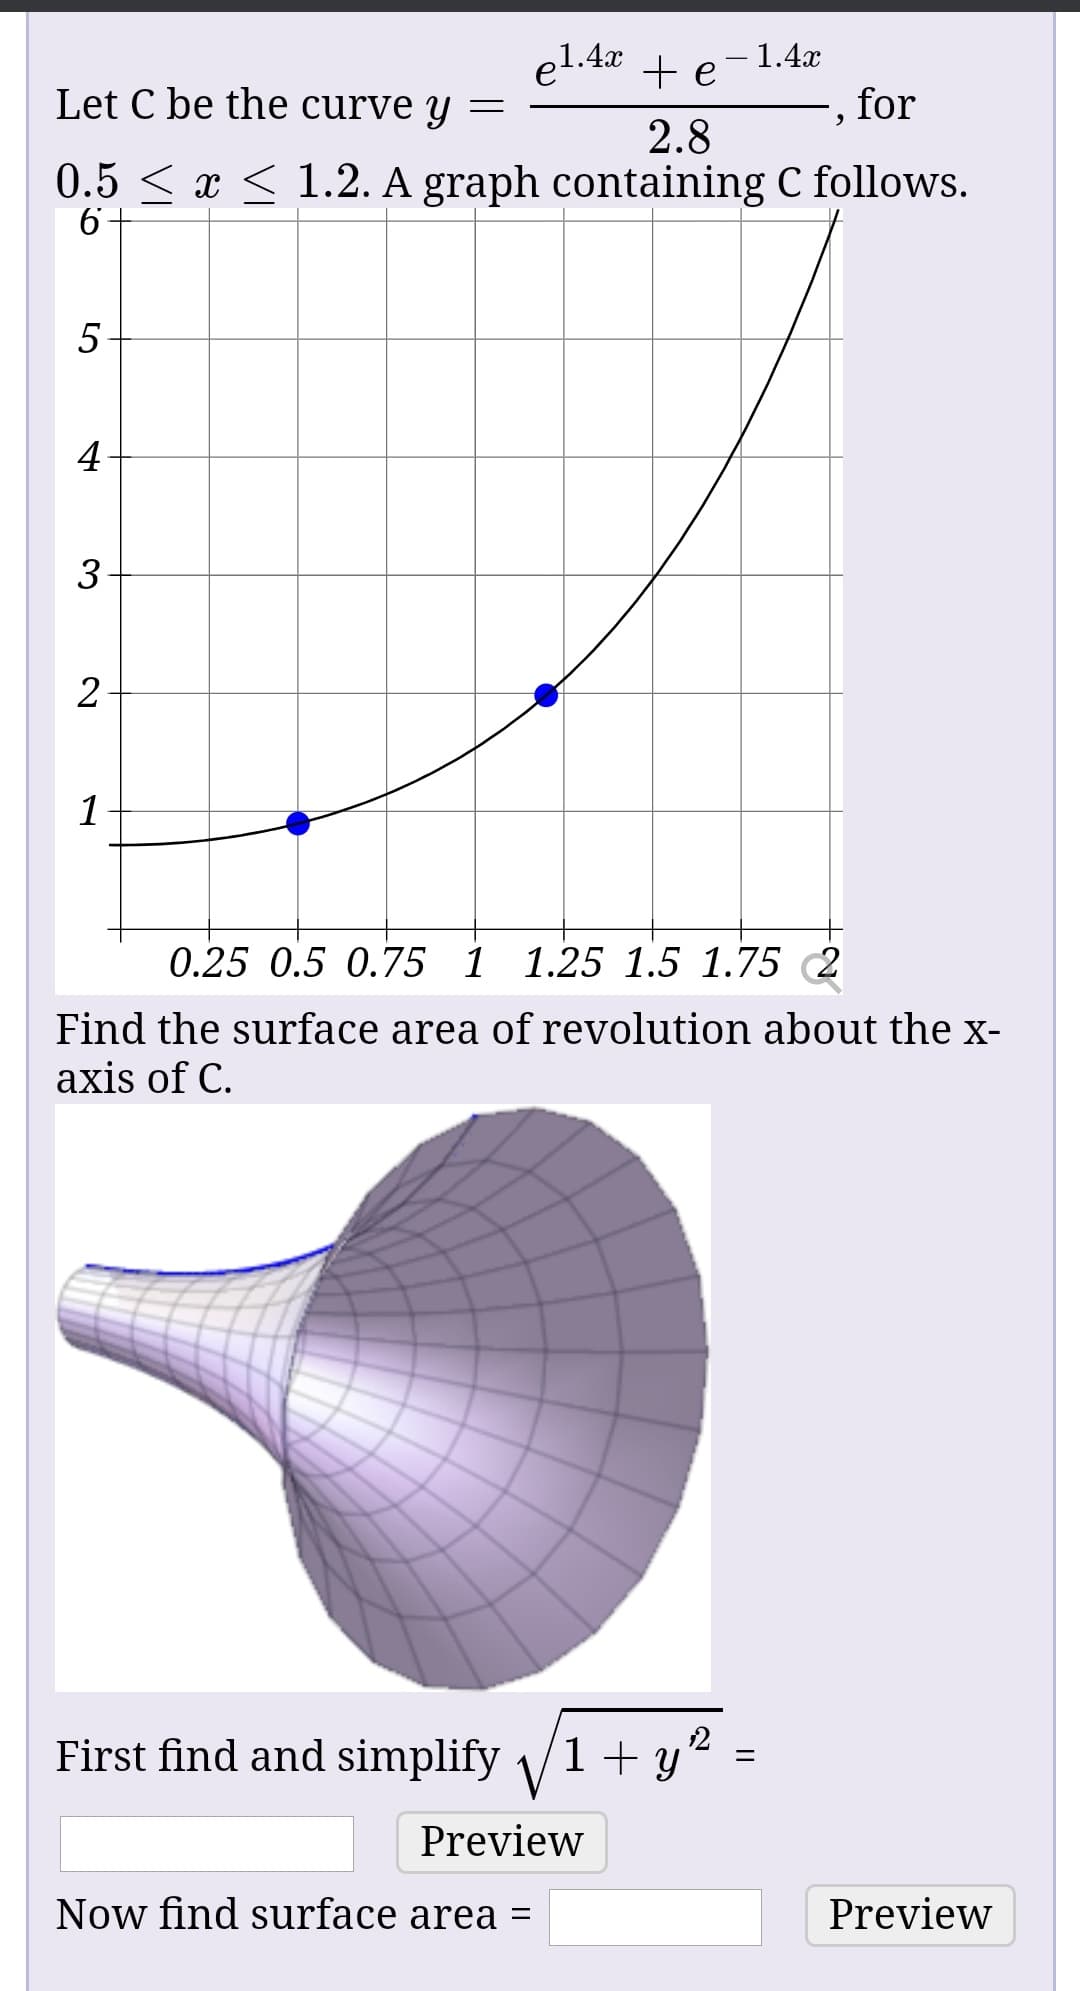 - 1.4x
for
el.4x
Let C be the curve y
2.8
0.5 < x < 1.2. A graph containing C follows.
0.25 0.5 0.75 1 1.25 1.5 1.75 2
Find the surface area of revolution about the x-
axis of C.
First find and simplify /1+ y"
Preview
Now find surface area =
Preview
||
3.
